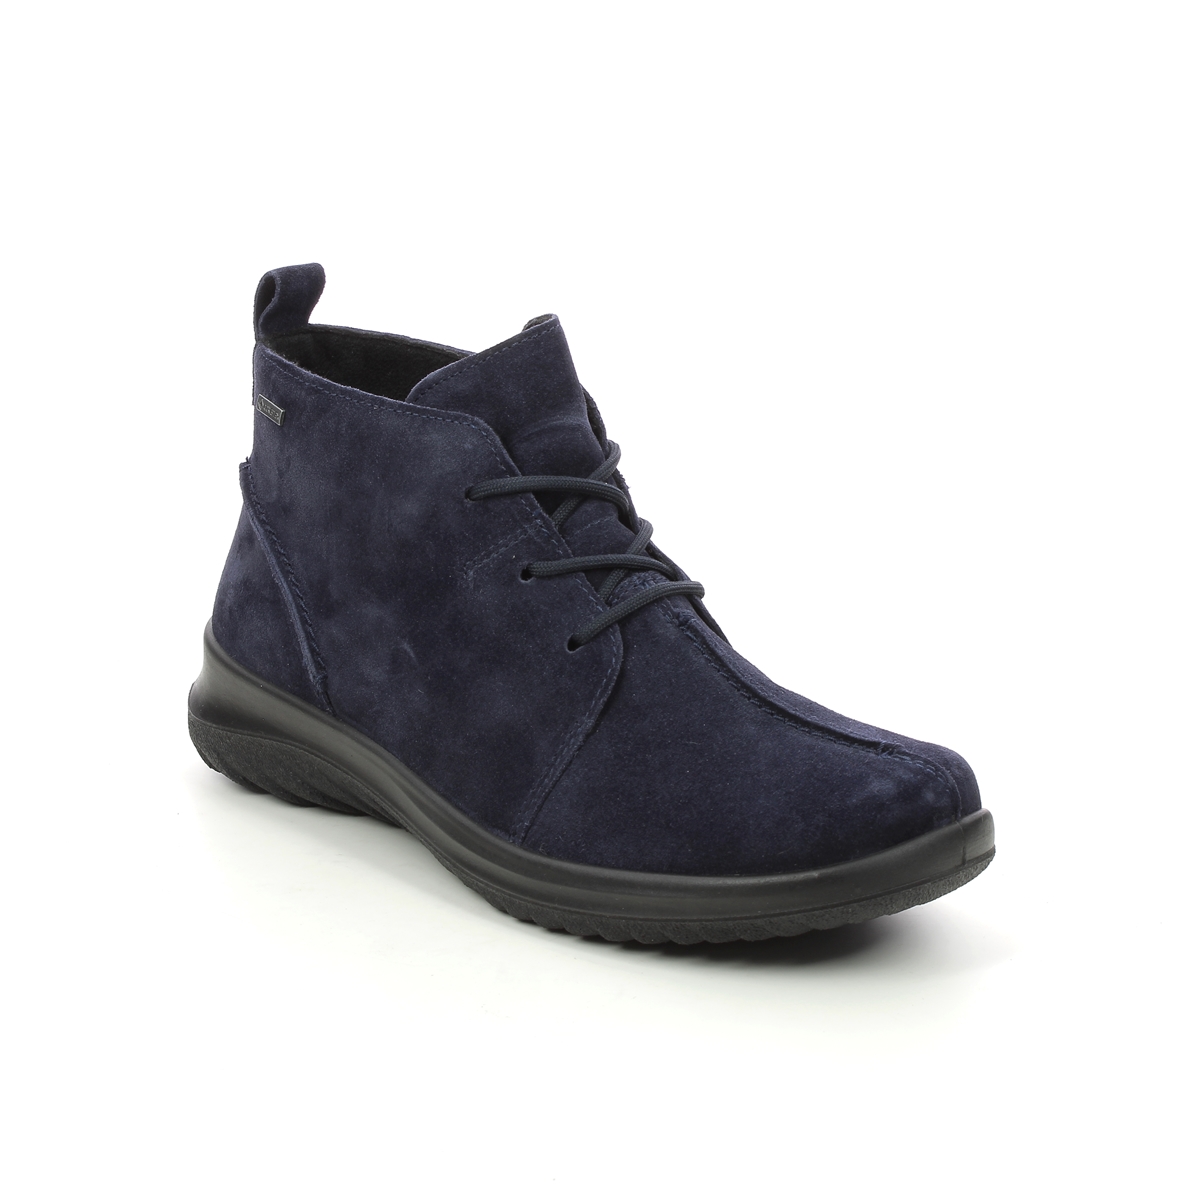 Legero Soft Lace Gtx Navy Suede Womens Lace Up Boots 2009569-8300 In Size 9 In Plain Navy Suede